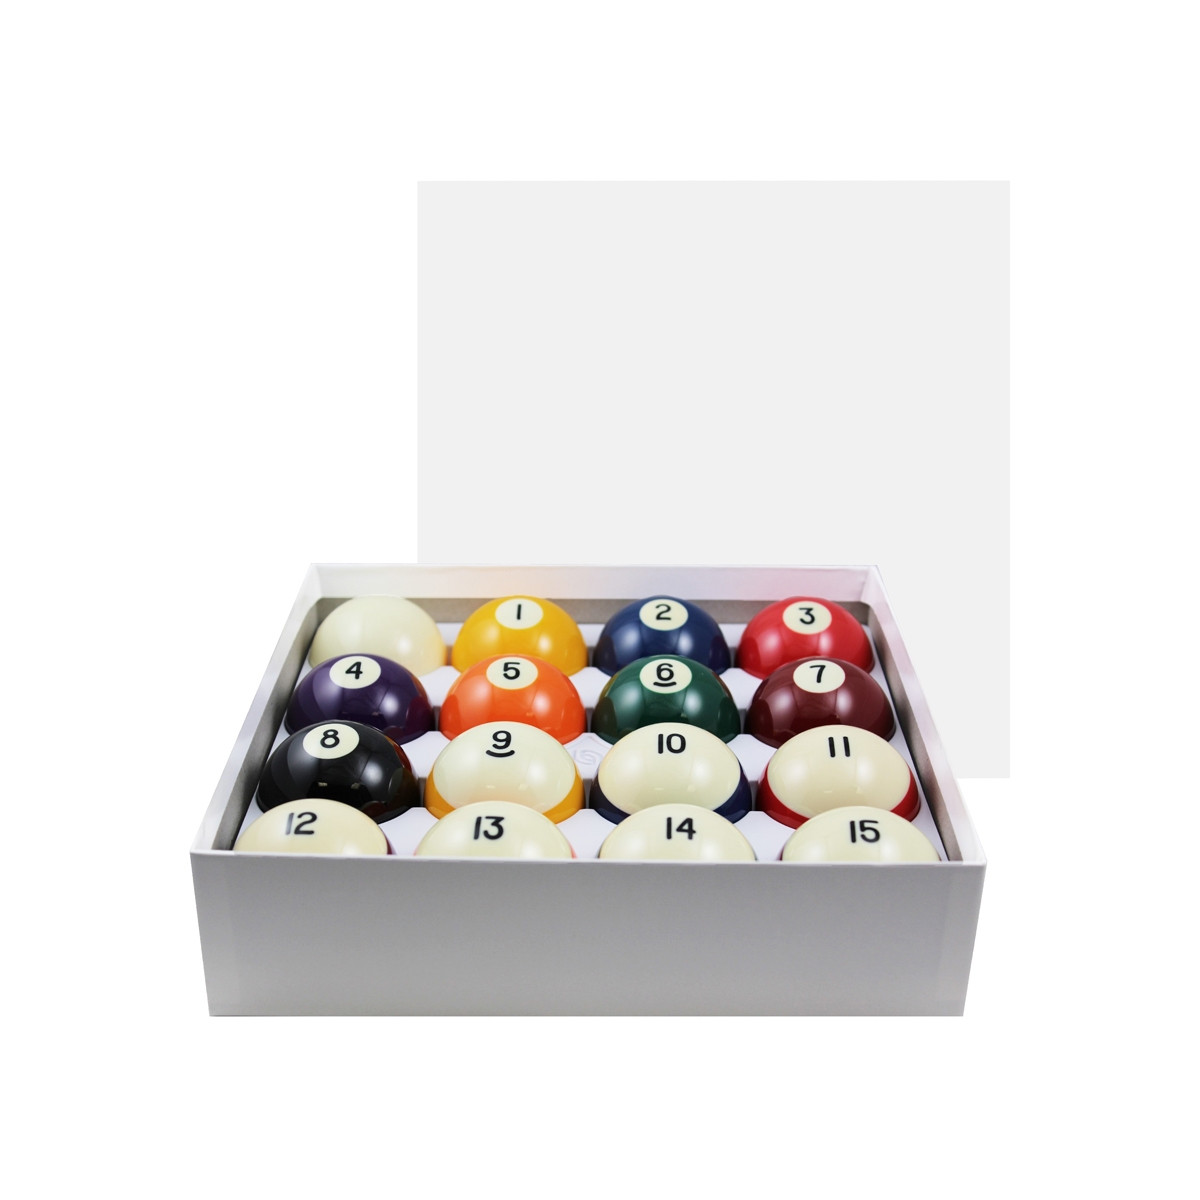 ARAMITH CROWN STANDARDS 2 1/4-IN. BILLIARD BALL SET – North Texas Pool Table  Movers